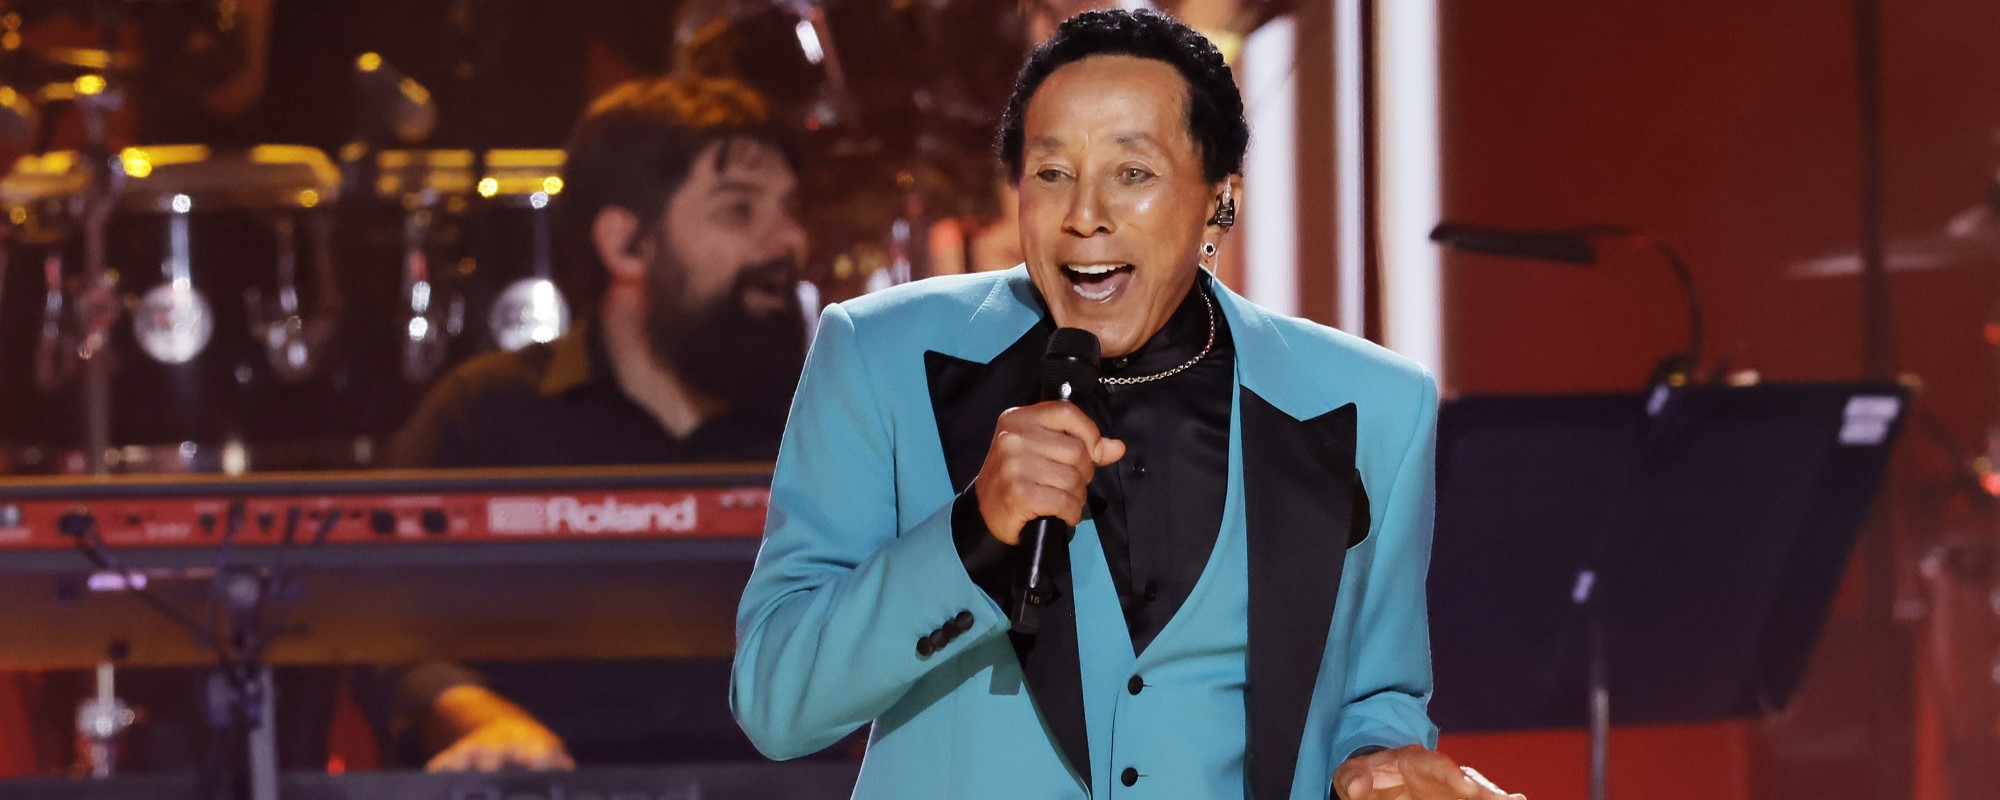 Happy Birthday, Smokey Robinson: Watch the Motown Legend Sing a “Pitch-Perfect” Miracles Medley in 1974